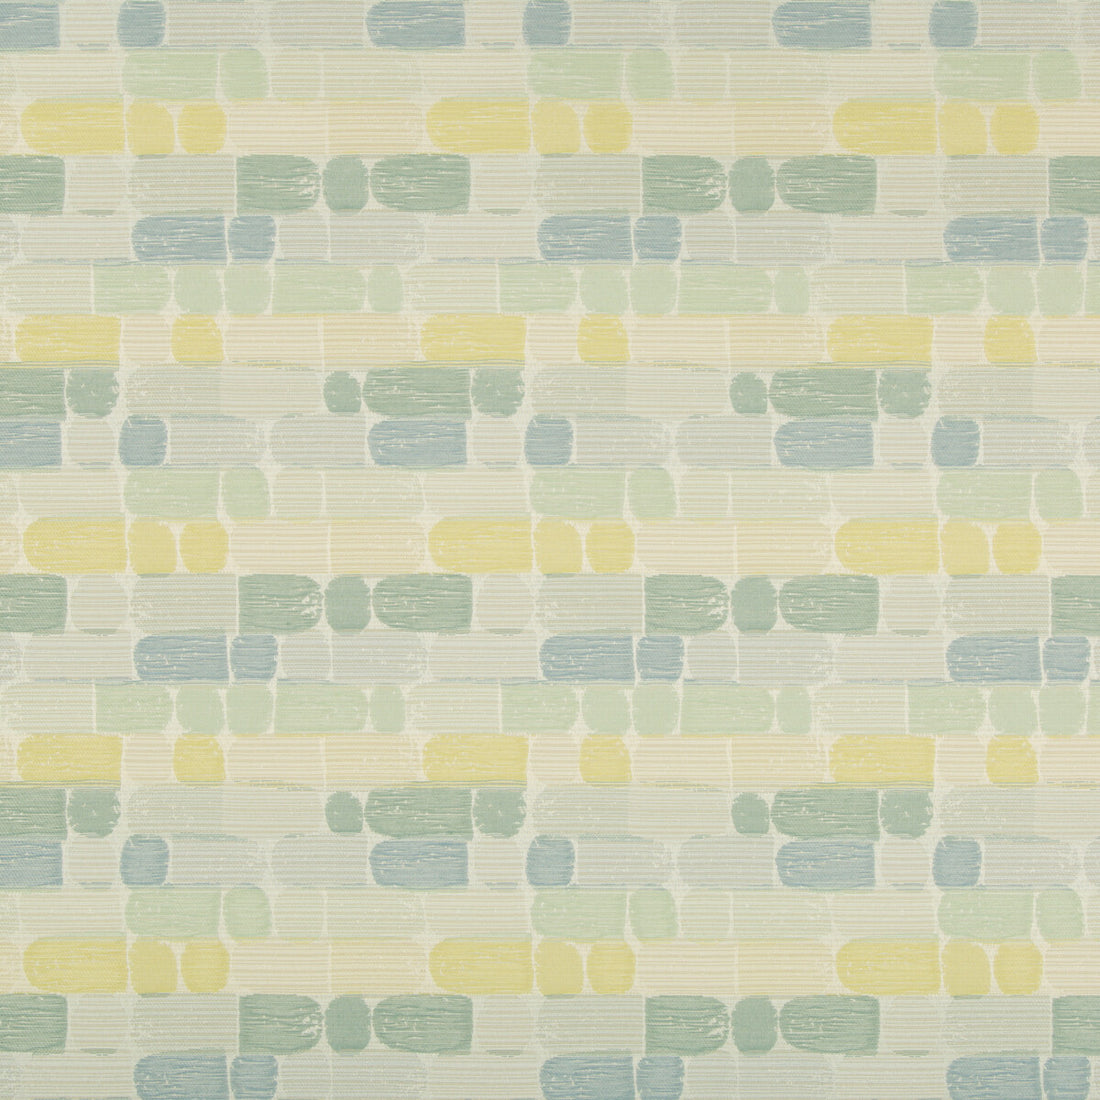 Fingerpaint fabric in day dream color - pattern 35088.1523.0 - by Kravet Contract in the Gis Crypton collection